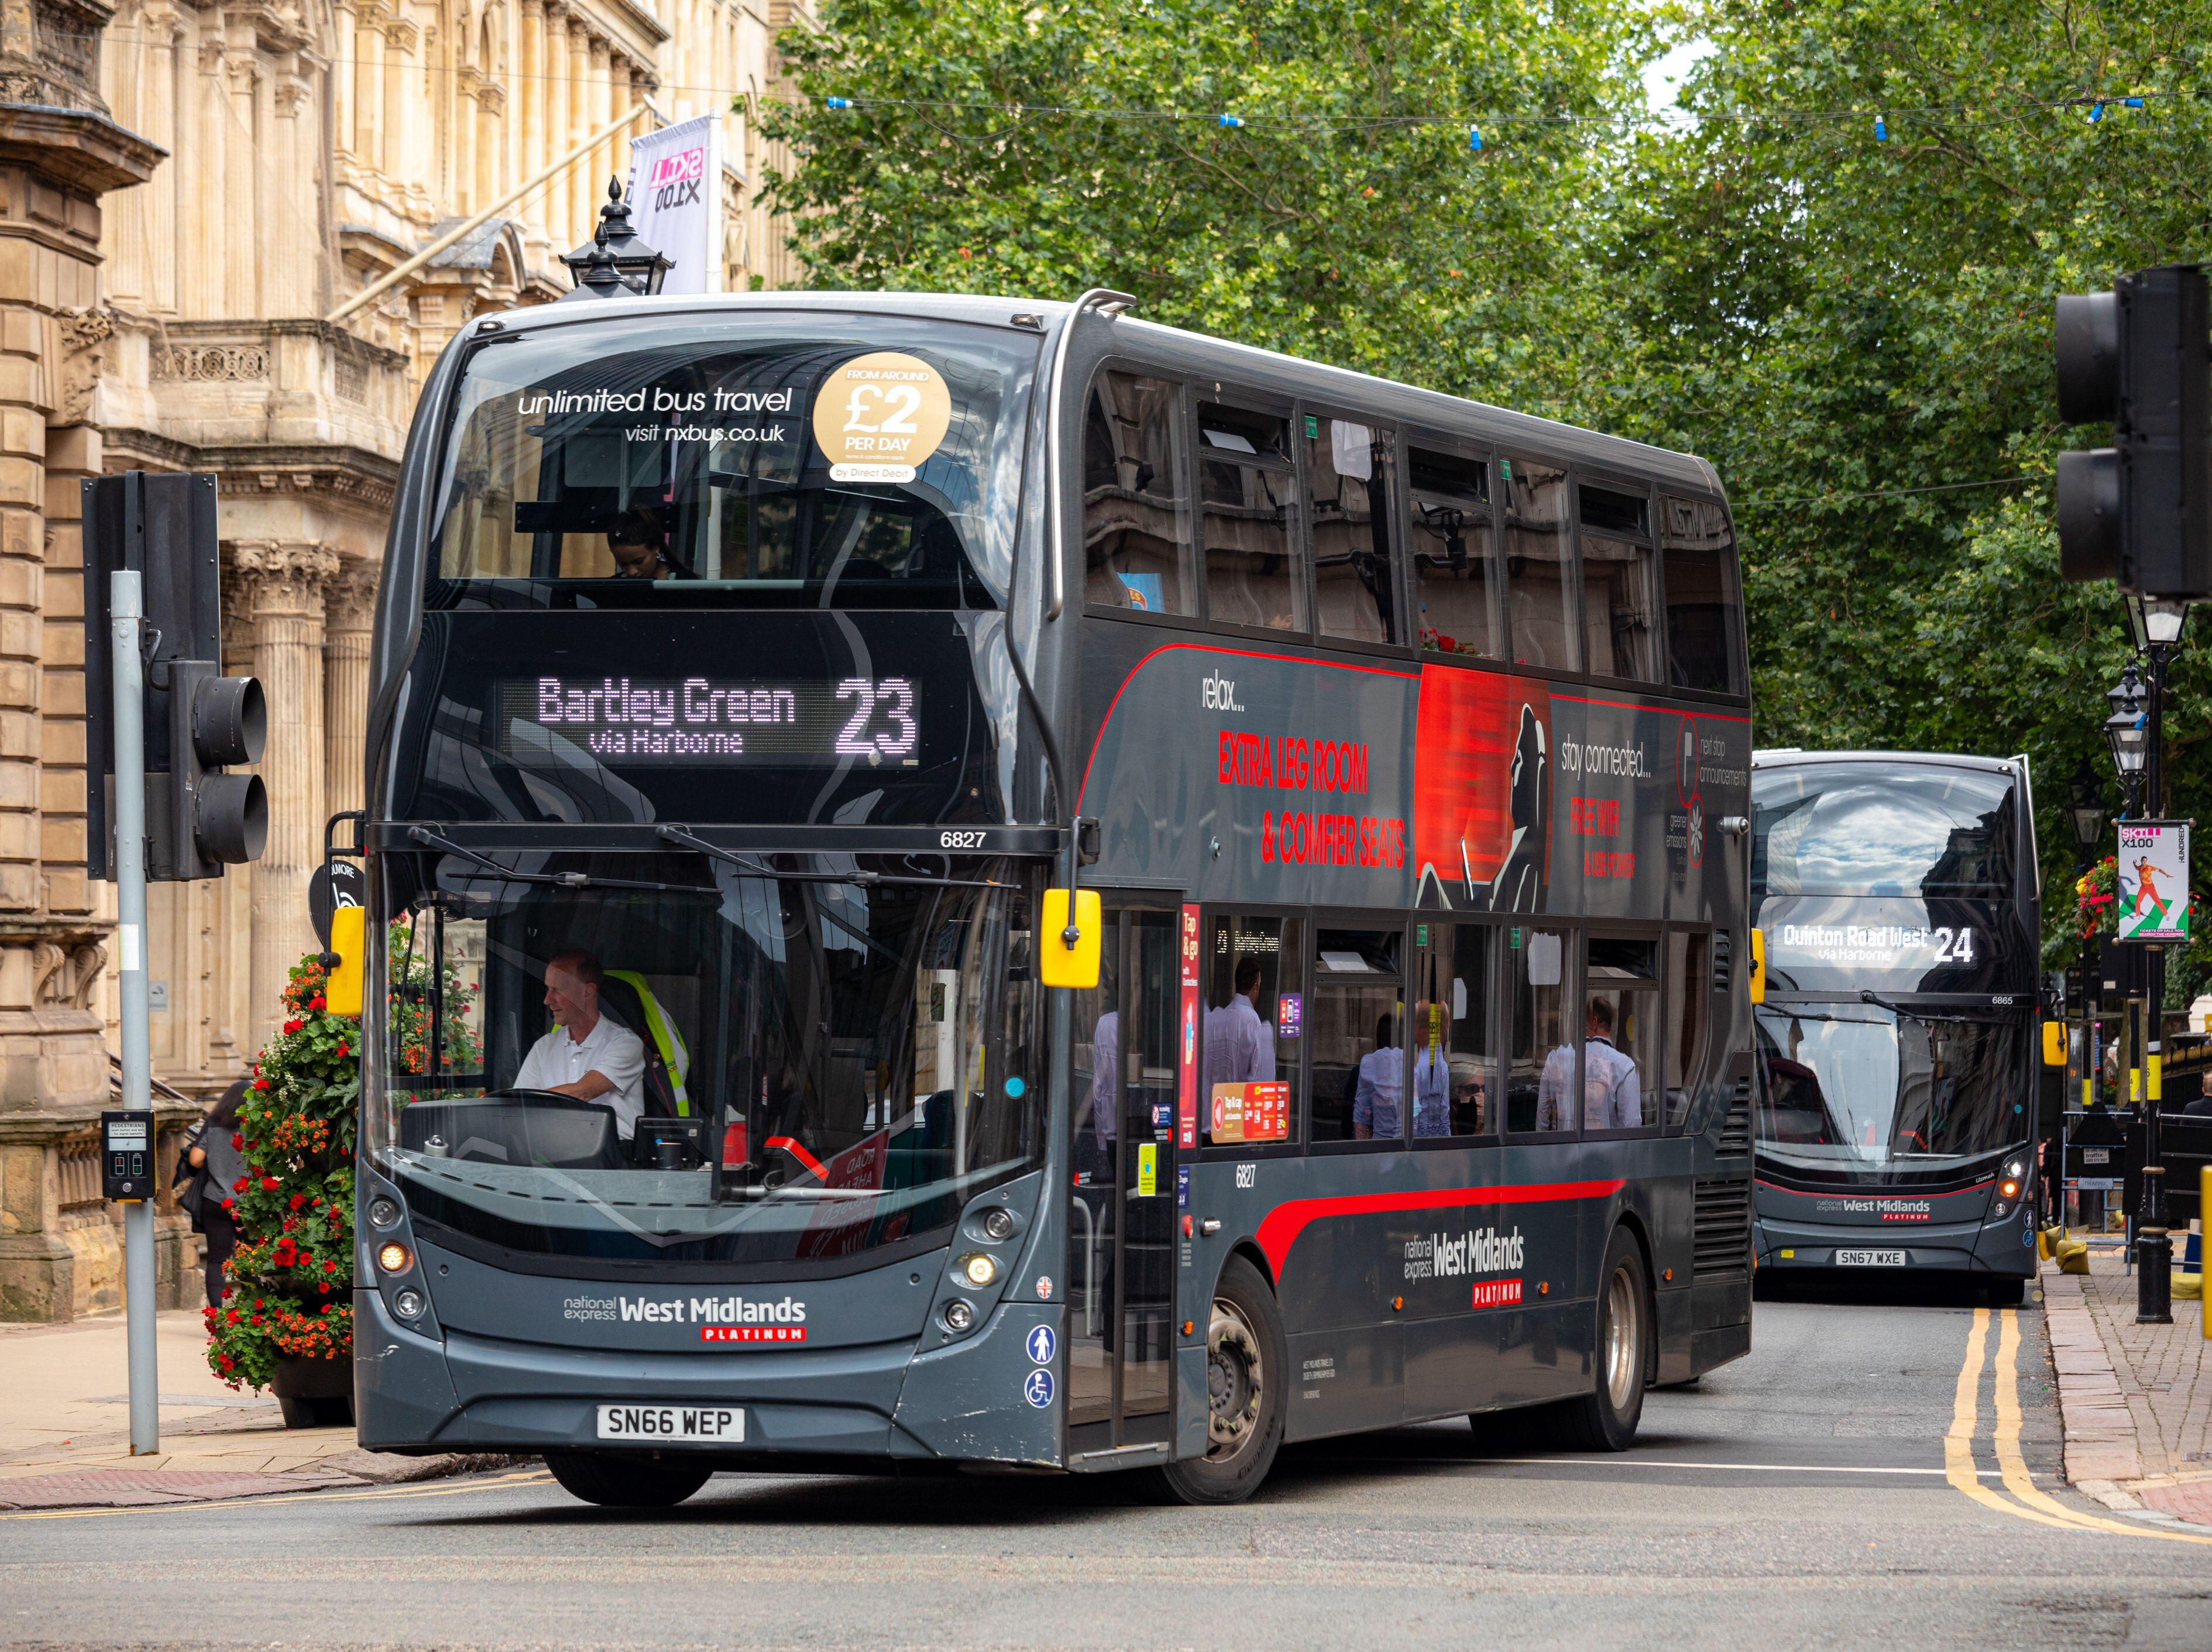 Strikes which would have almost shut 'entire bus network' in West Midlands suspended